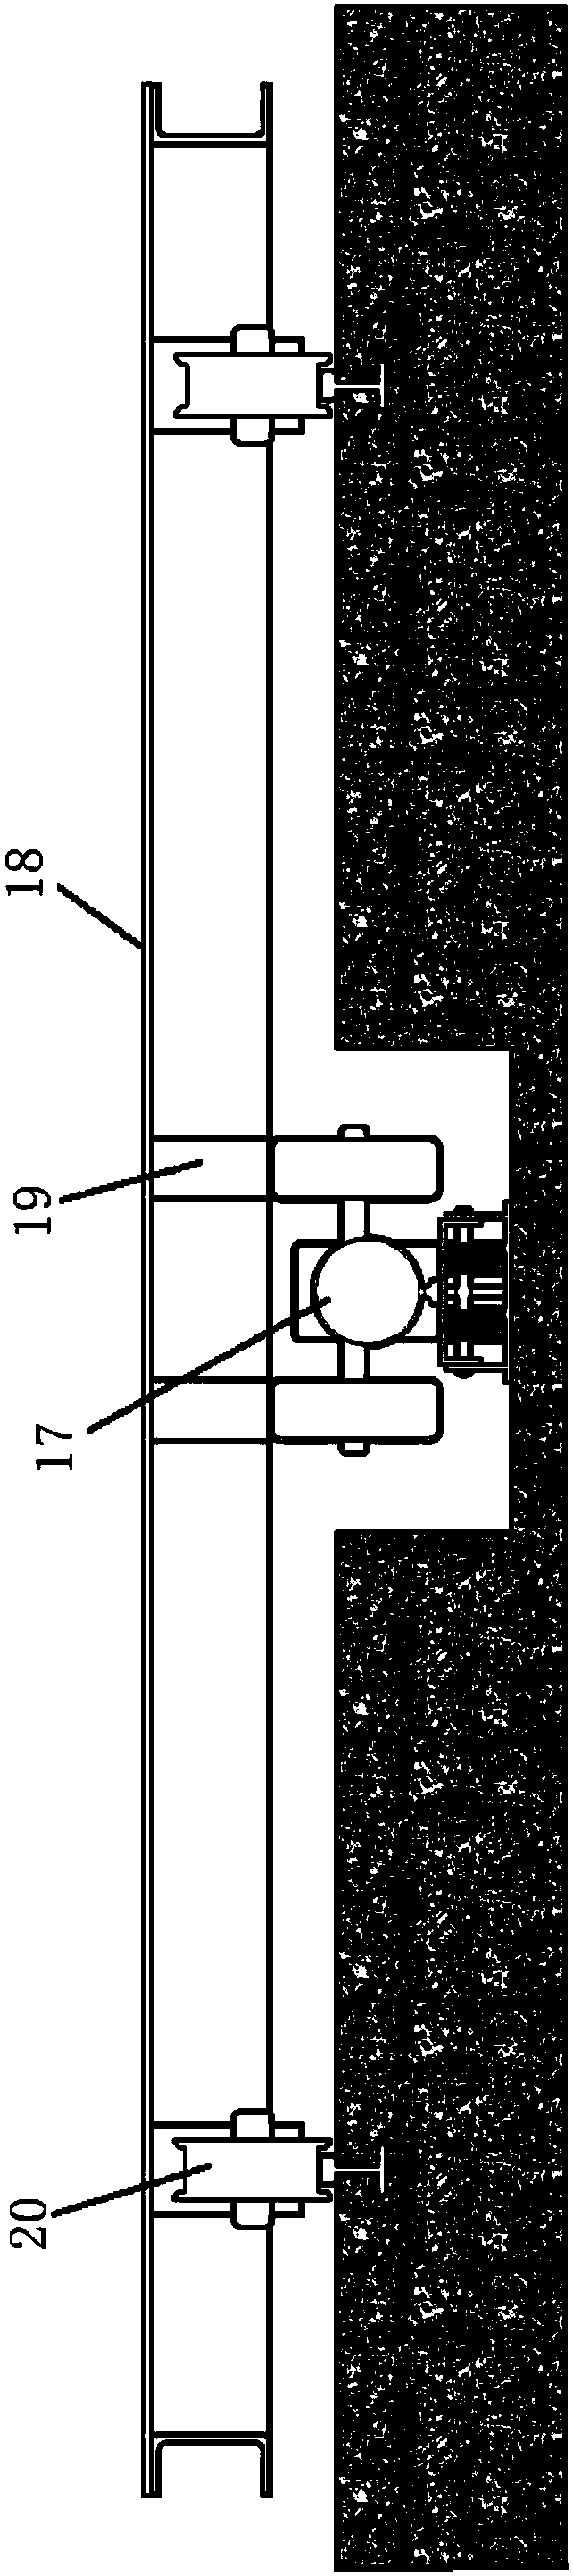 Three-dimensional production system for prefabricated components